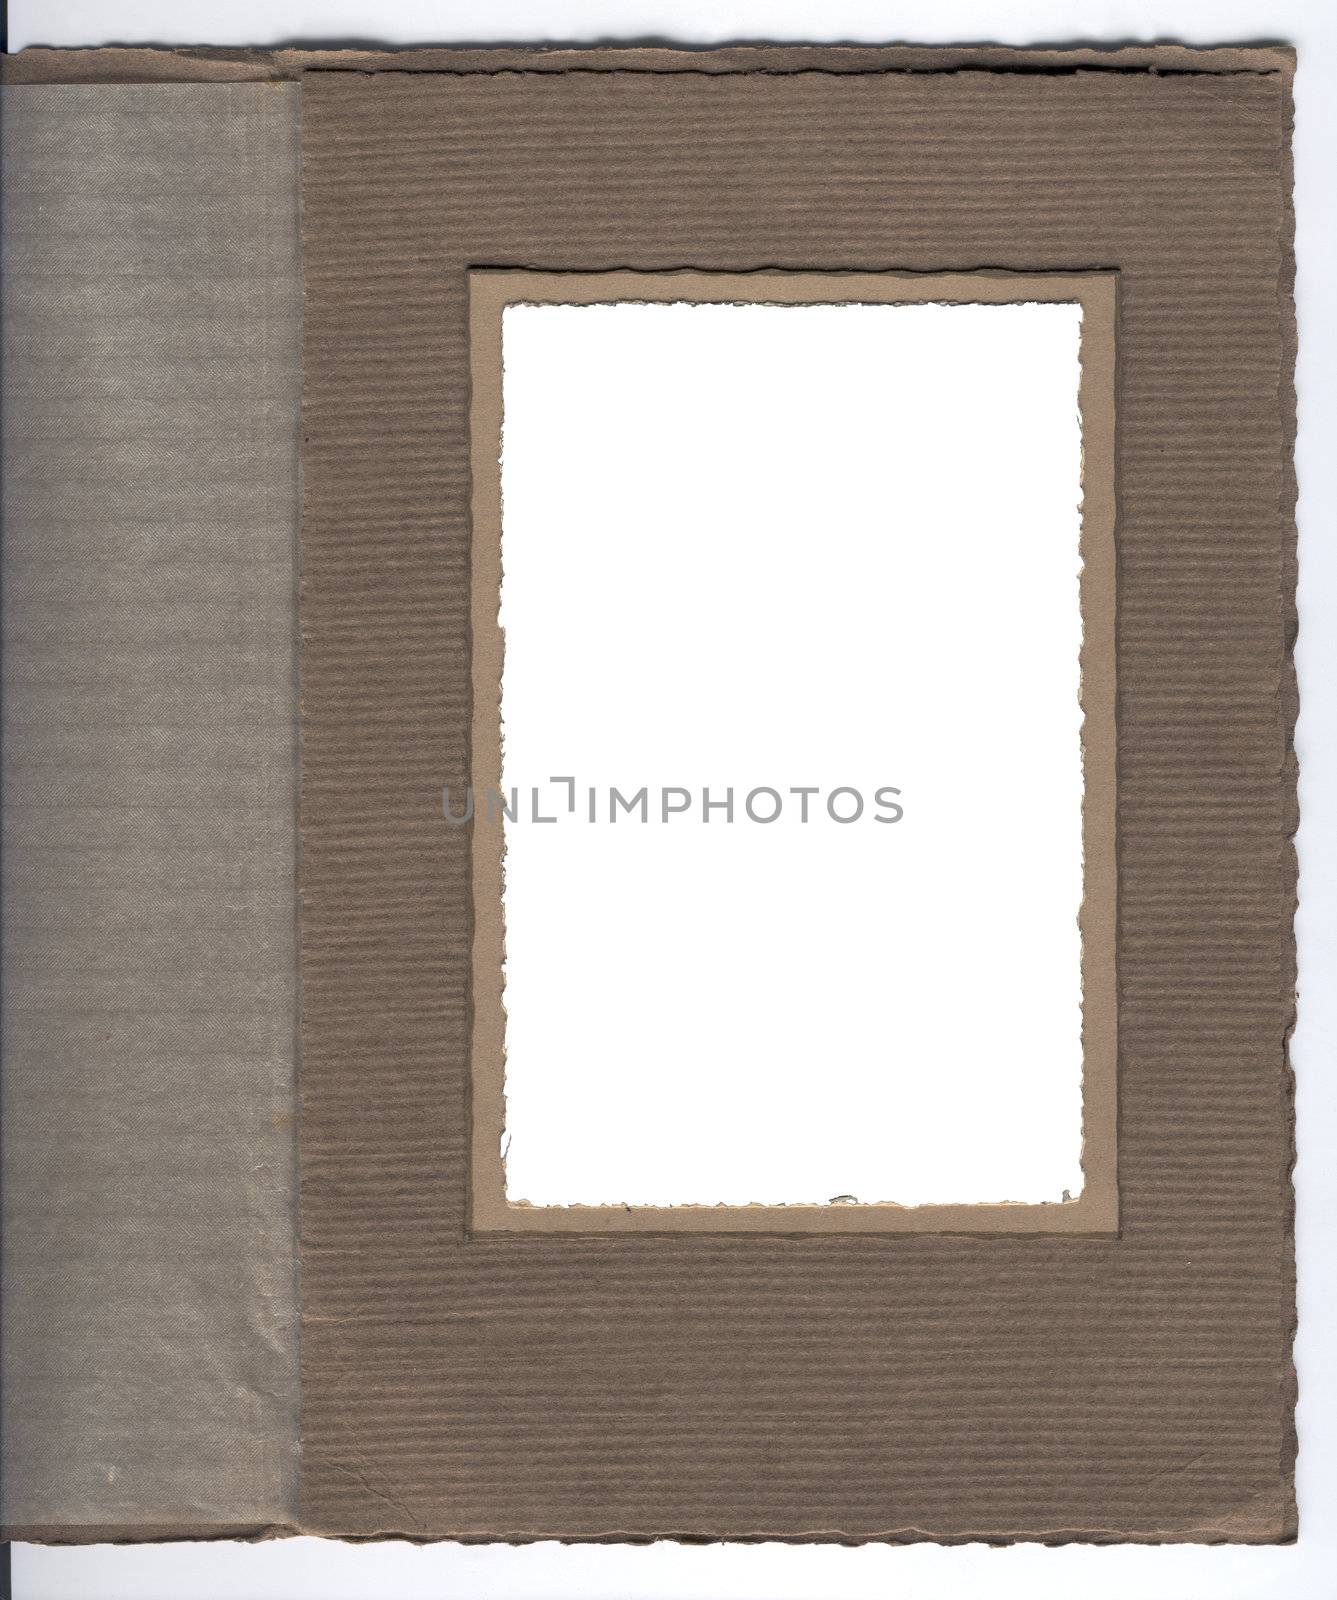 Old card board photo frame with copyspace or space for image. Ideal for scrapbooking.